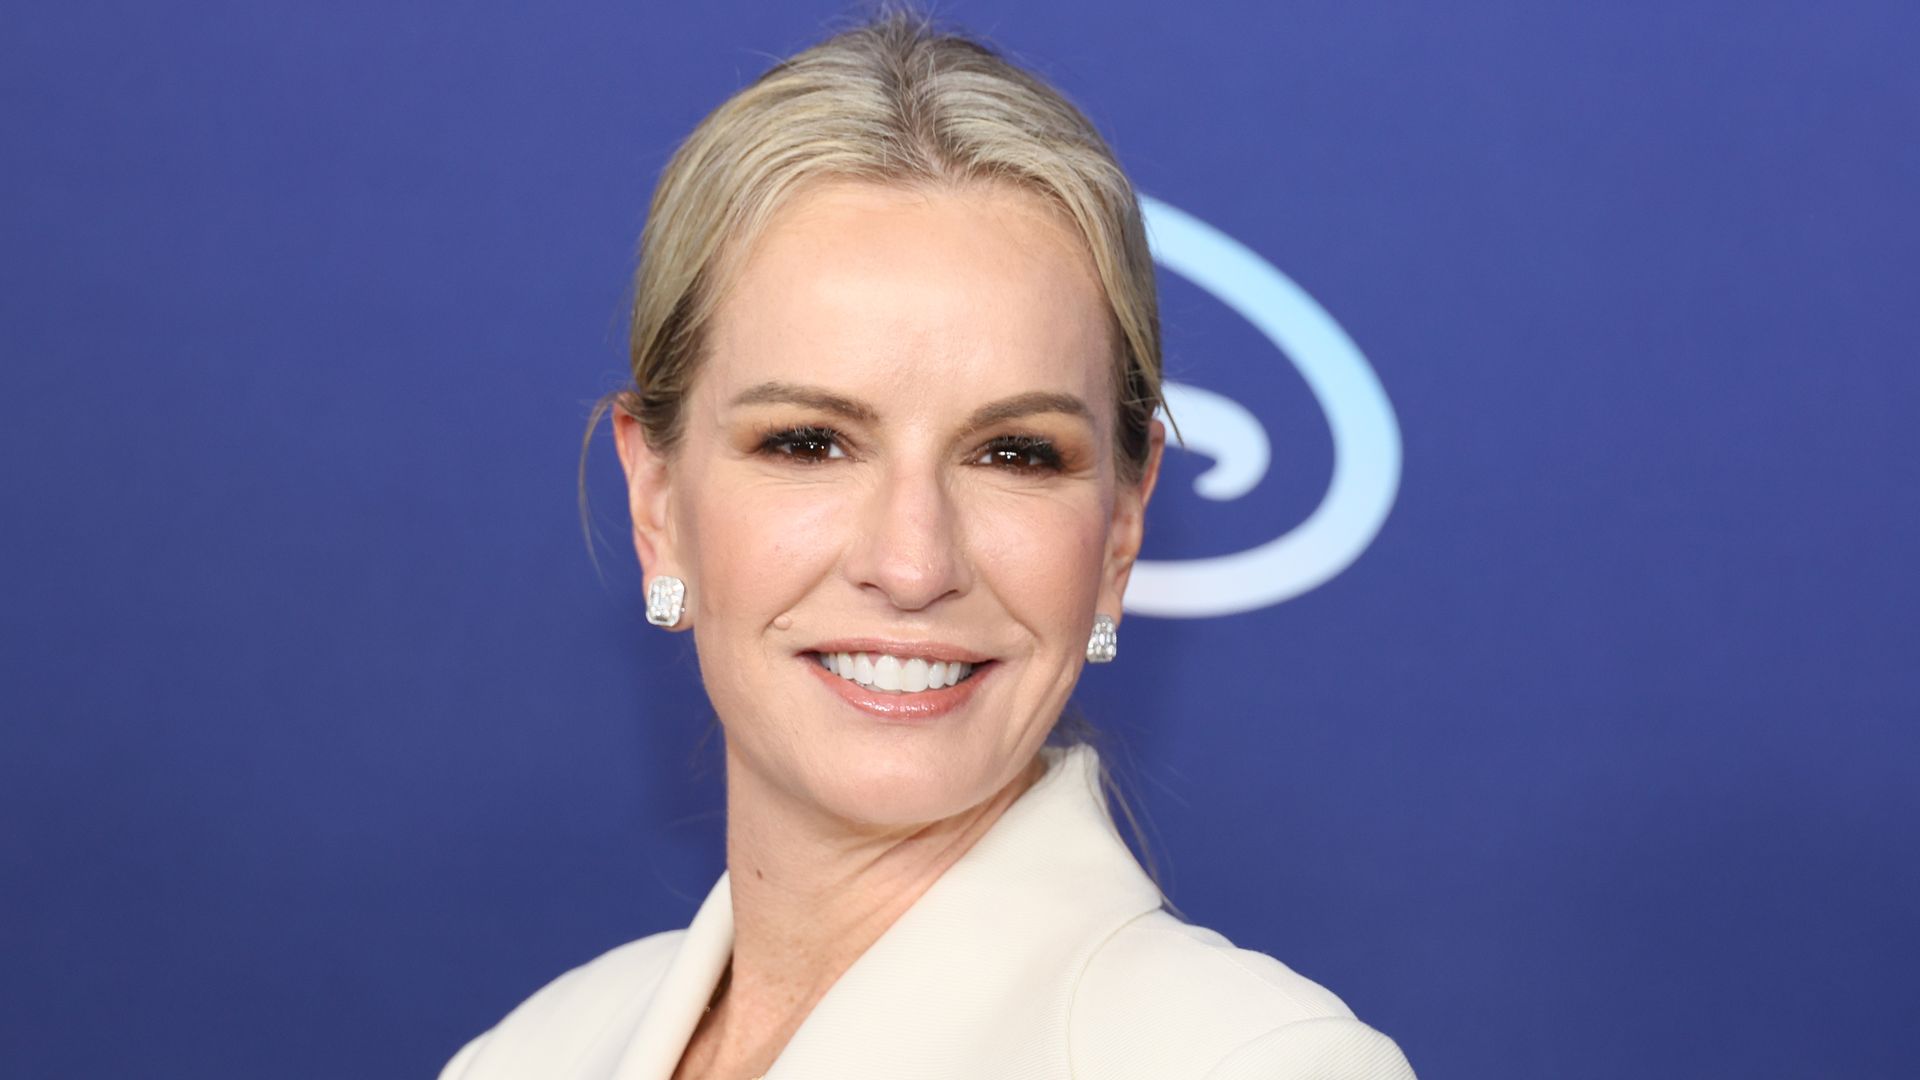 GMA's Dr. Jennifer Ashton is living her best life as she breaks silence following show exit